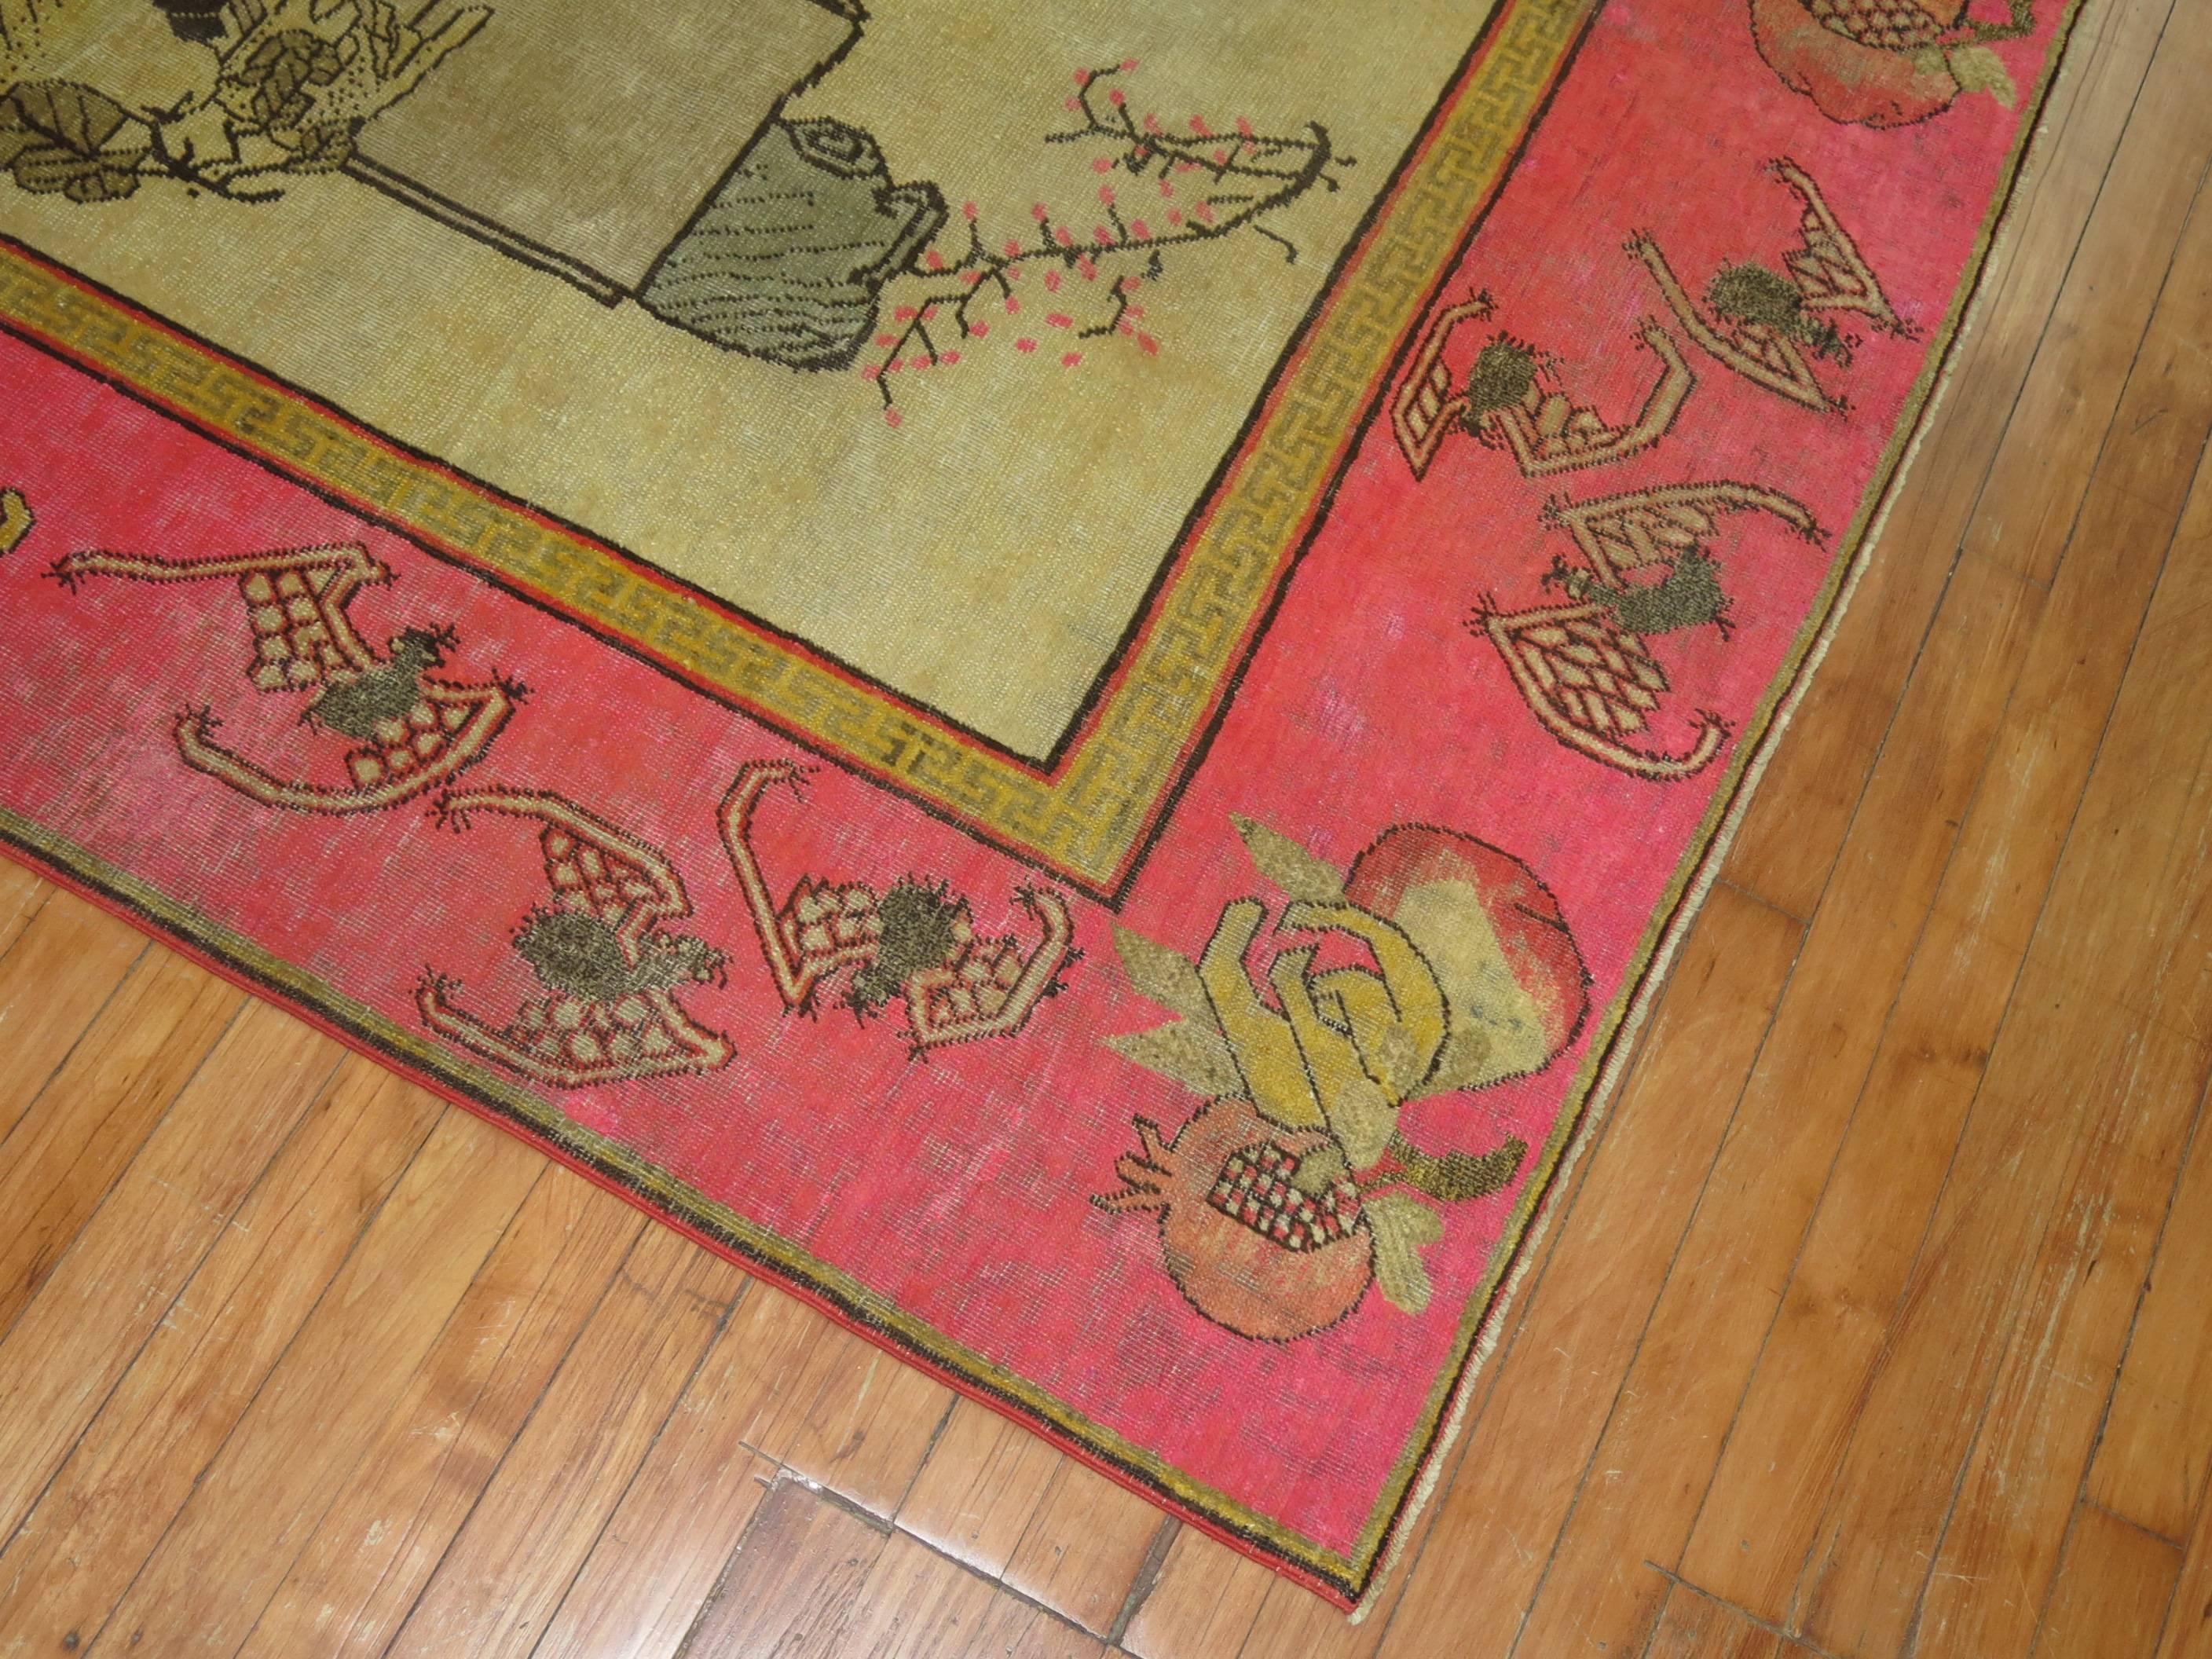 Cotton Antique Pictorial Khotan Rug with Bright Pink Border